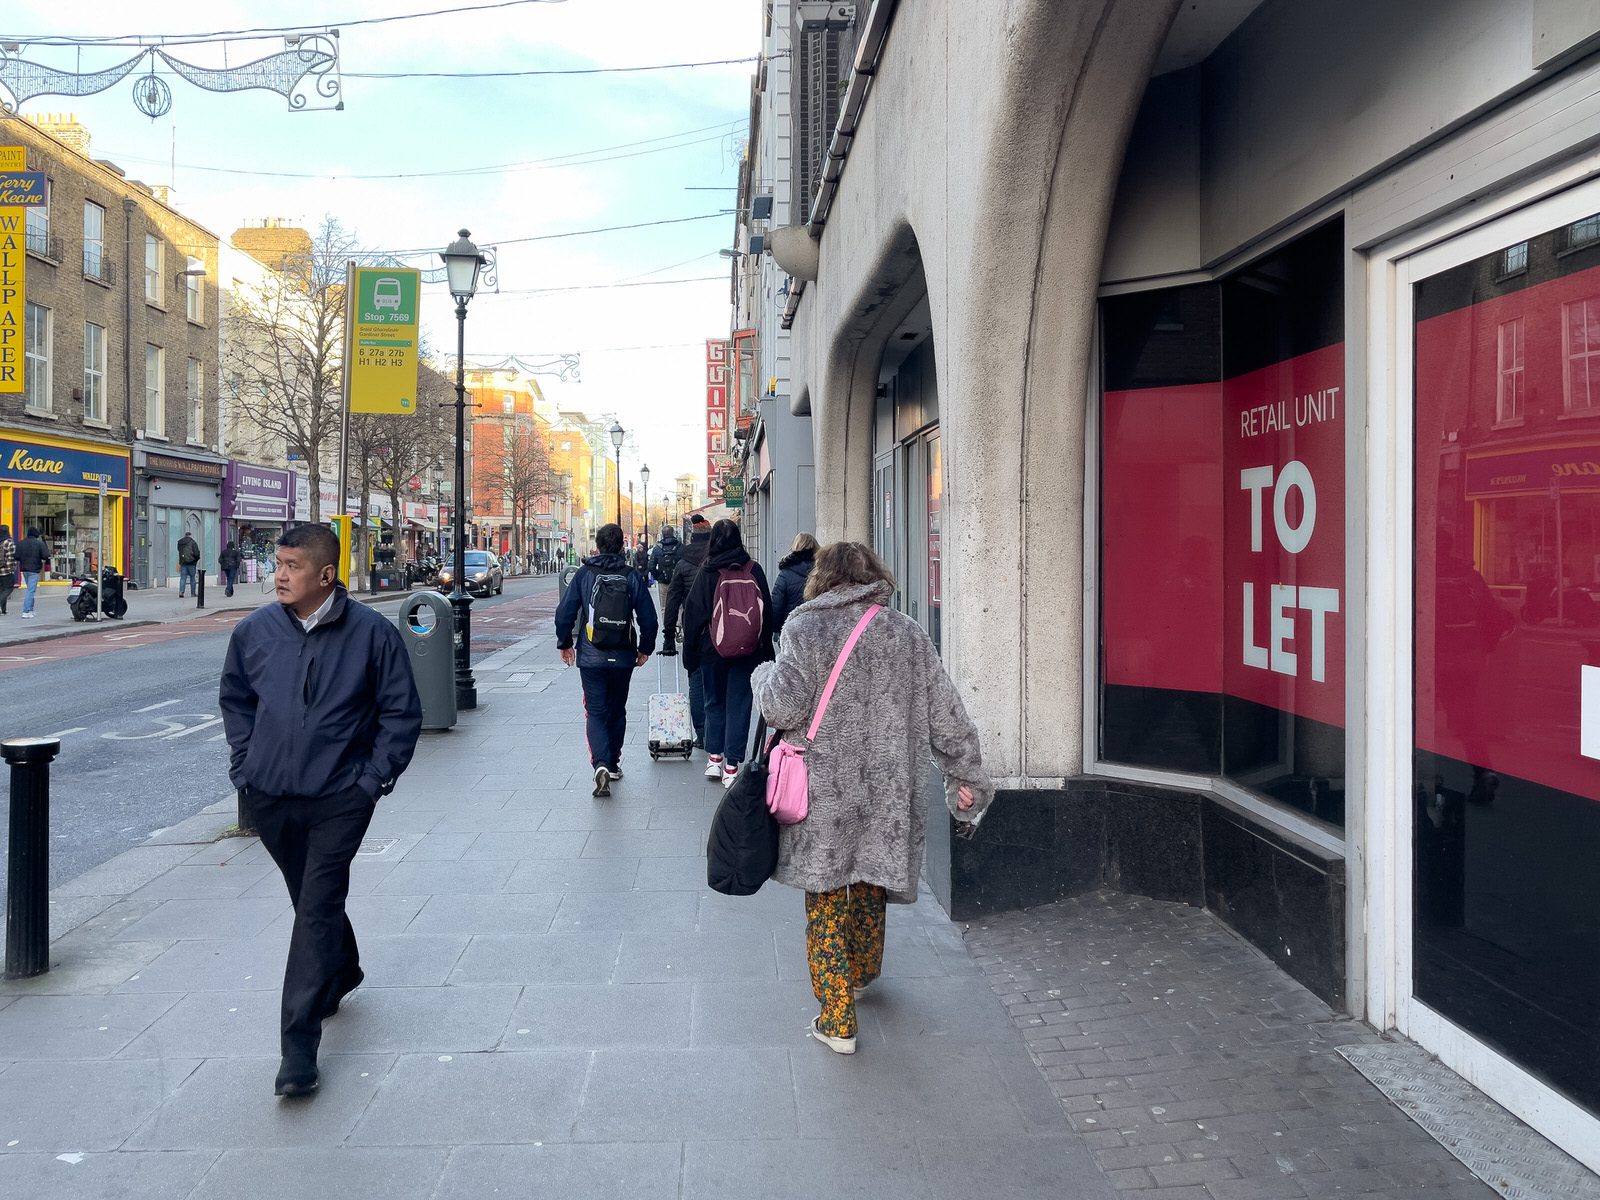 TALBOT STREET [FAILS TO MEET ITS POTENTIAL AS A MAJOR SHOPPING STREET]-225725-1